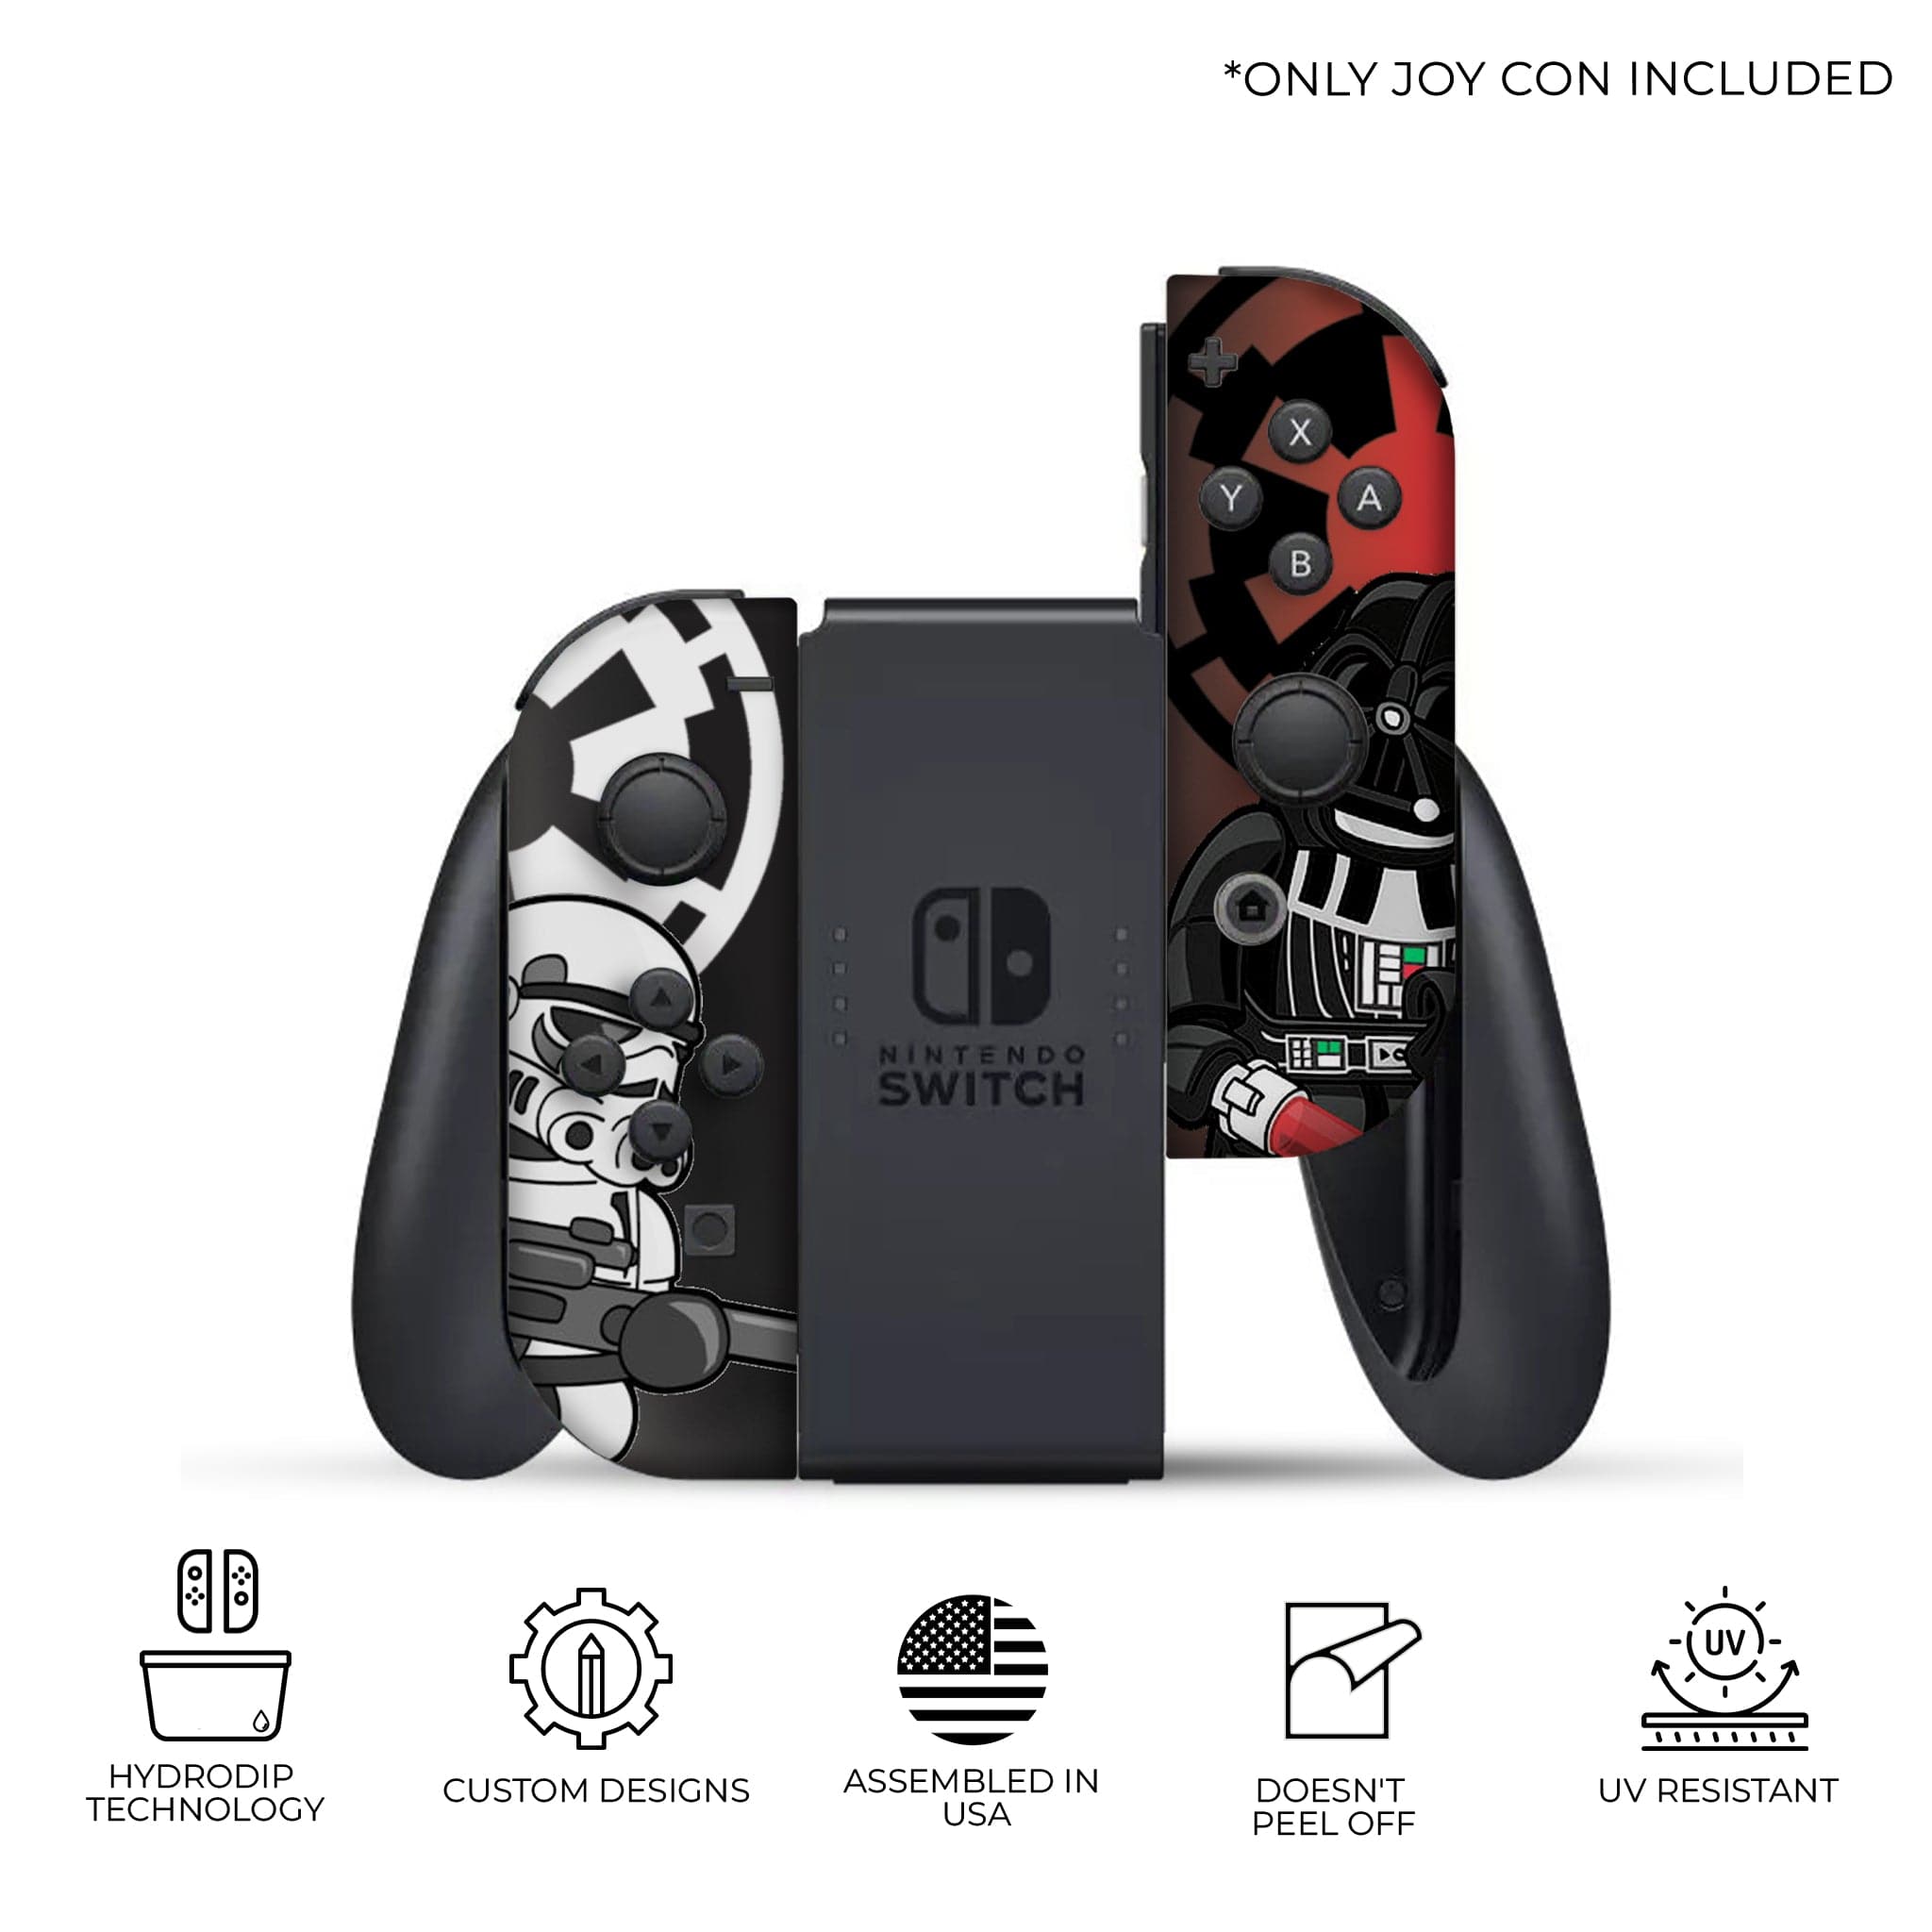 Lego Star wars series Inspired Nintendo Switch Joy-Con Left and Right Switch Controllers by Nintendo